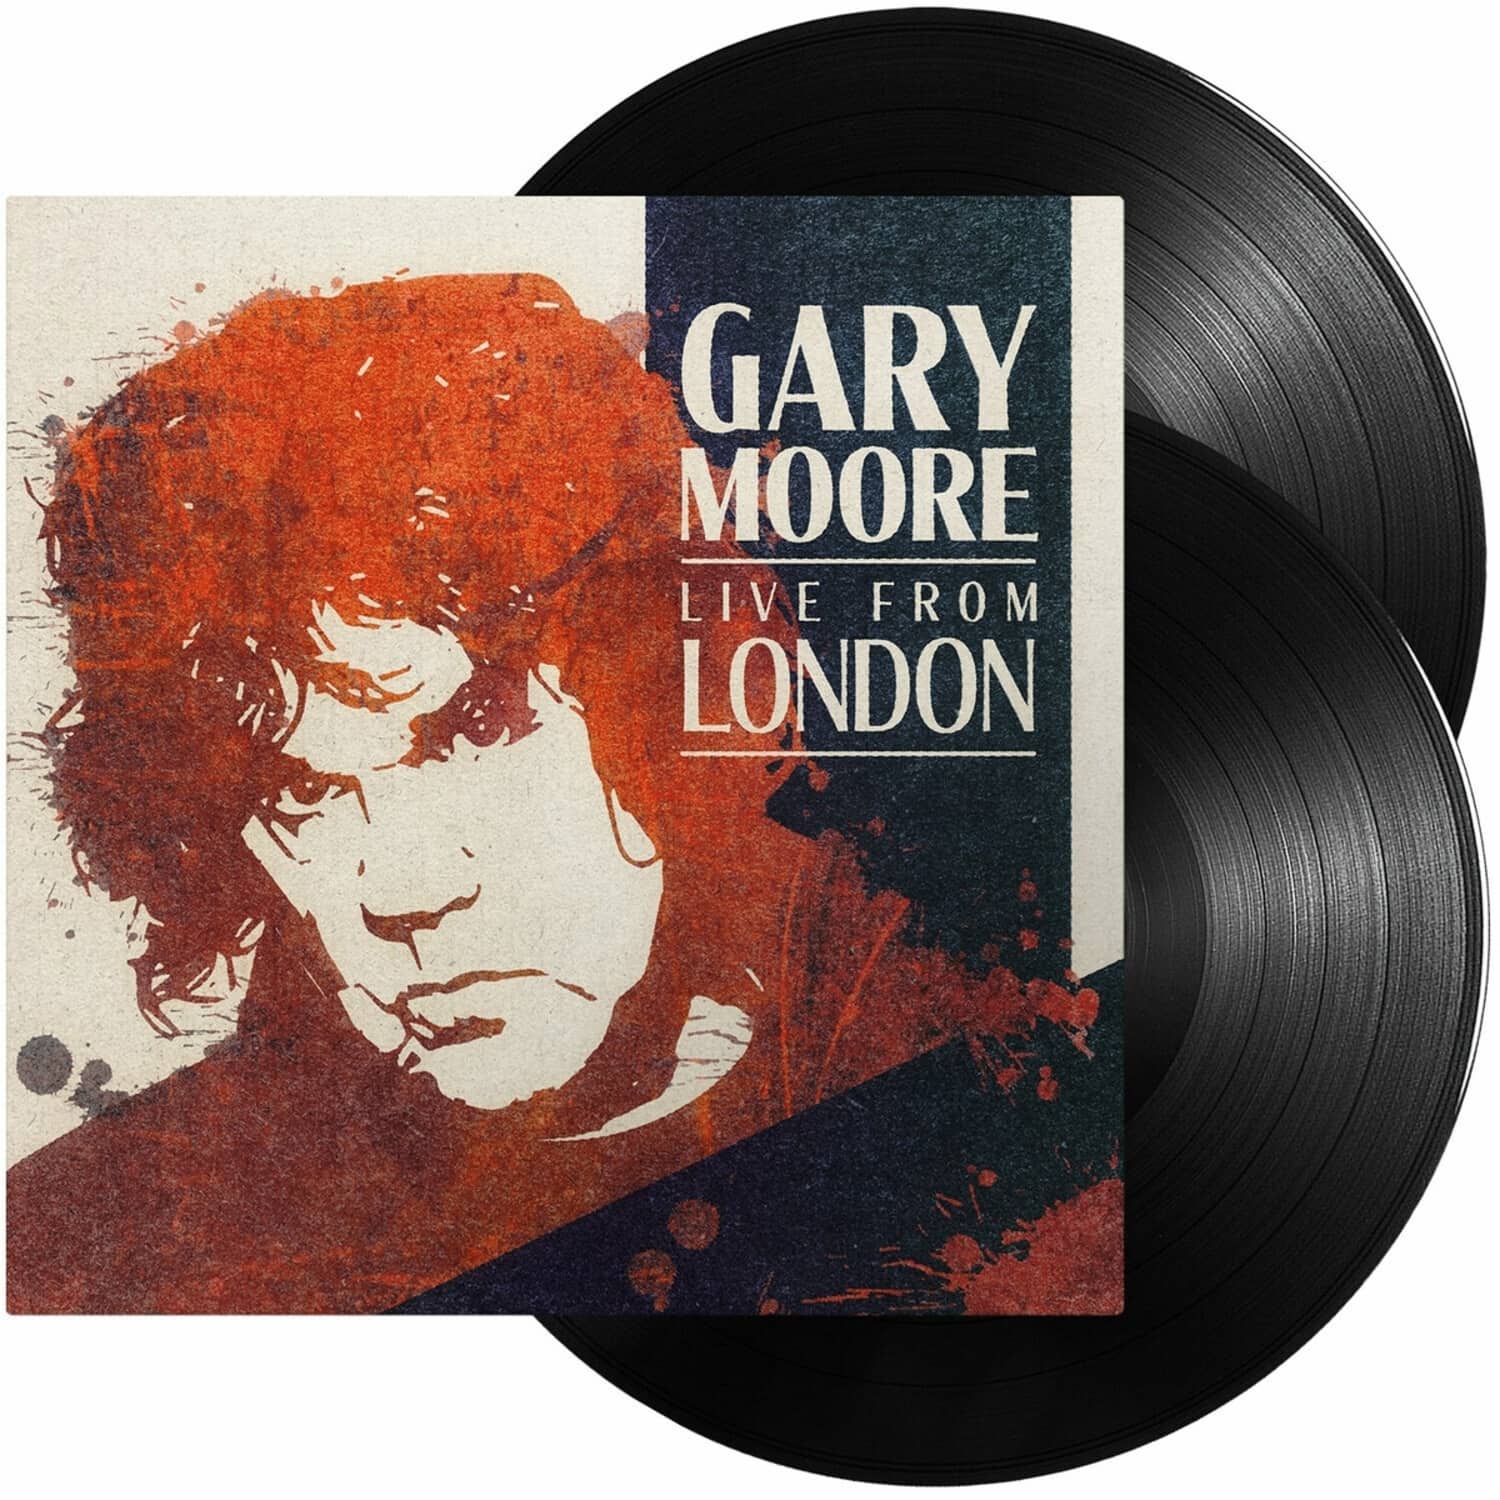 Gary Moore - LIVE FROM LONDON 